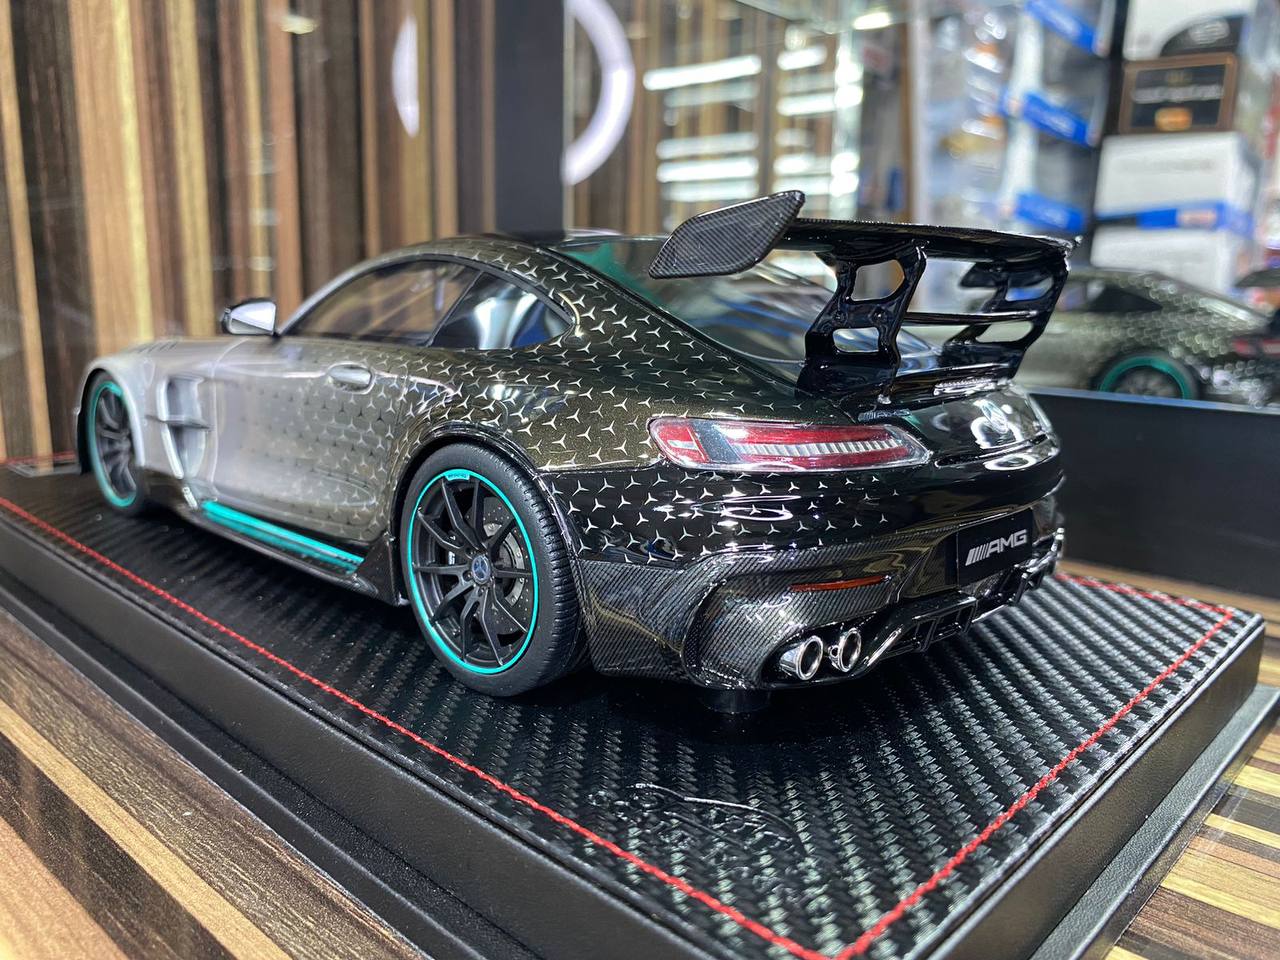 1/18 Resin Mercedes-Benz AMG GT Black Series Silver by VIP Models